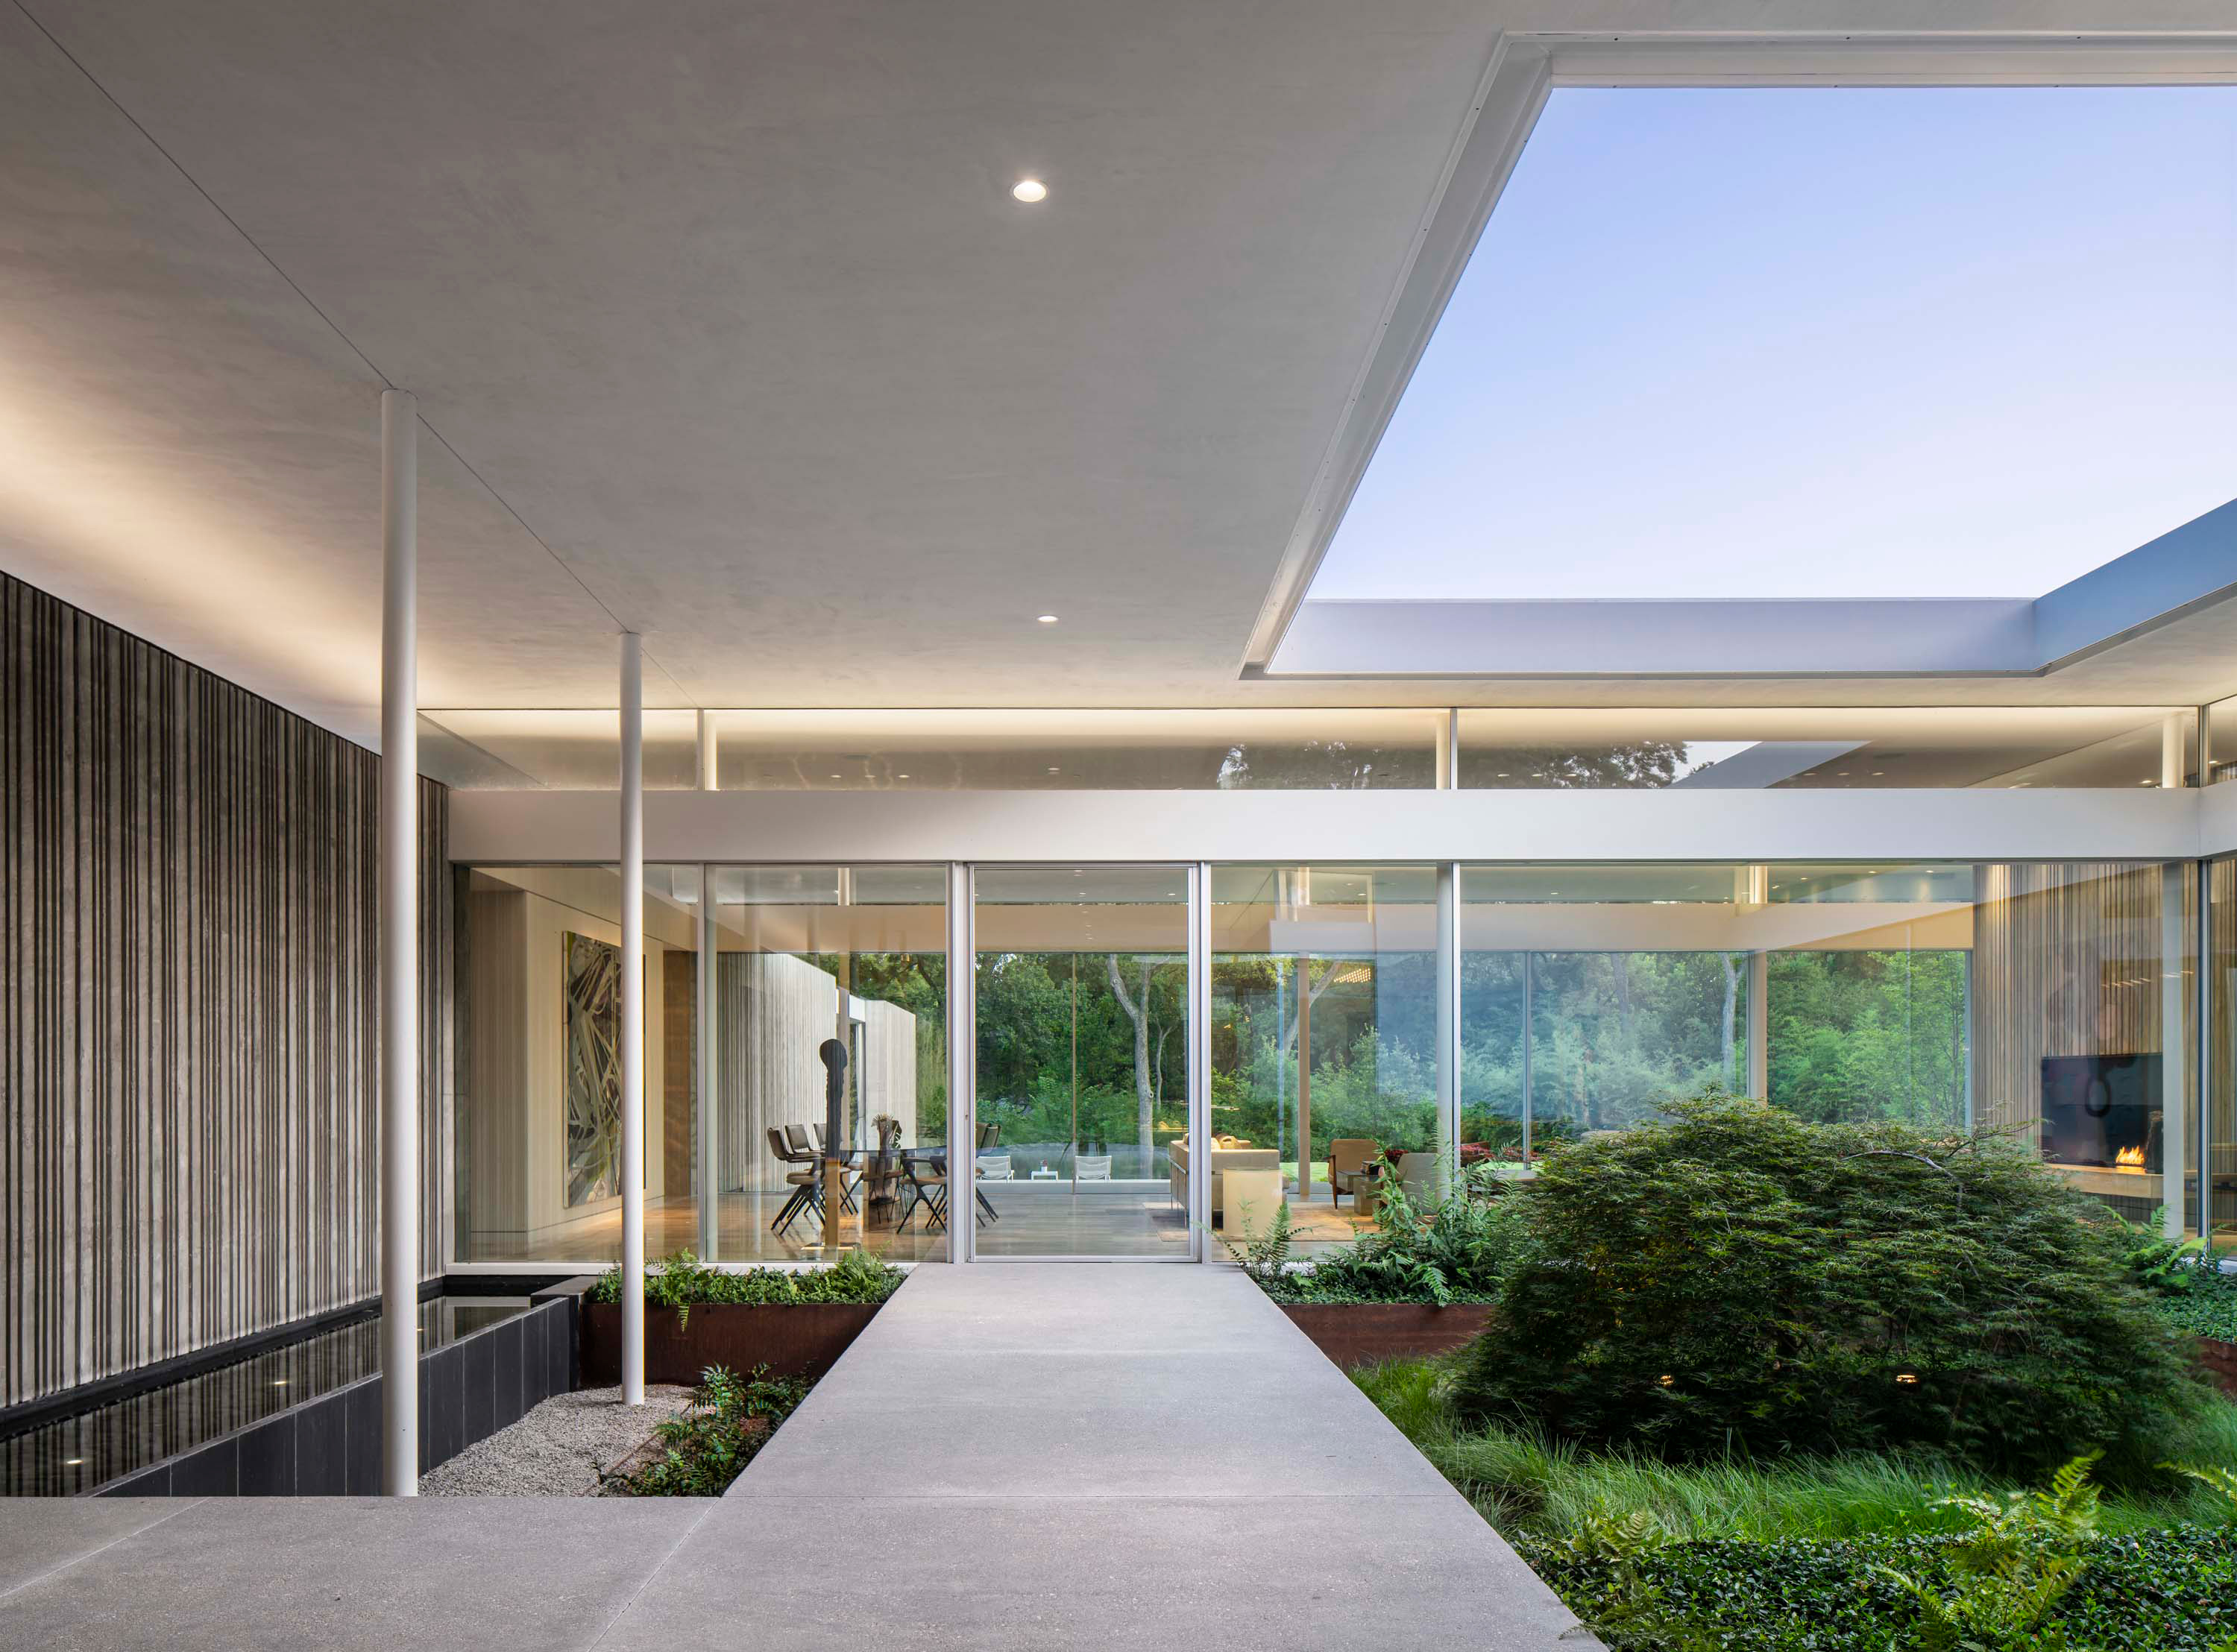 Interior photo of the Preston Hollow Residence by Specht Novak Architects. Shot in the afternoon by Manolo Langis, featuring a hallway that leads to a living space with a water feature on its right and indoor garden with open roof to its right.